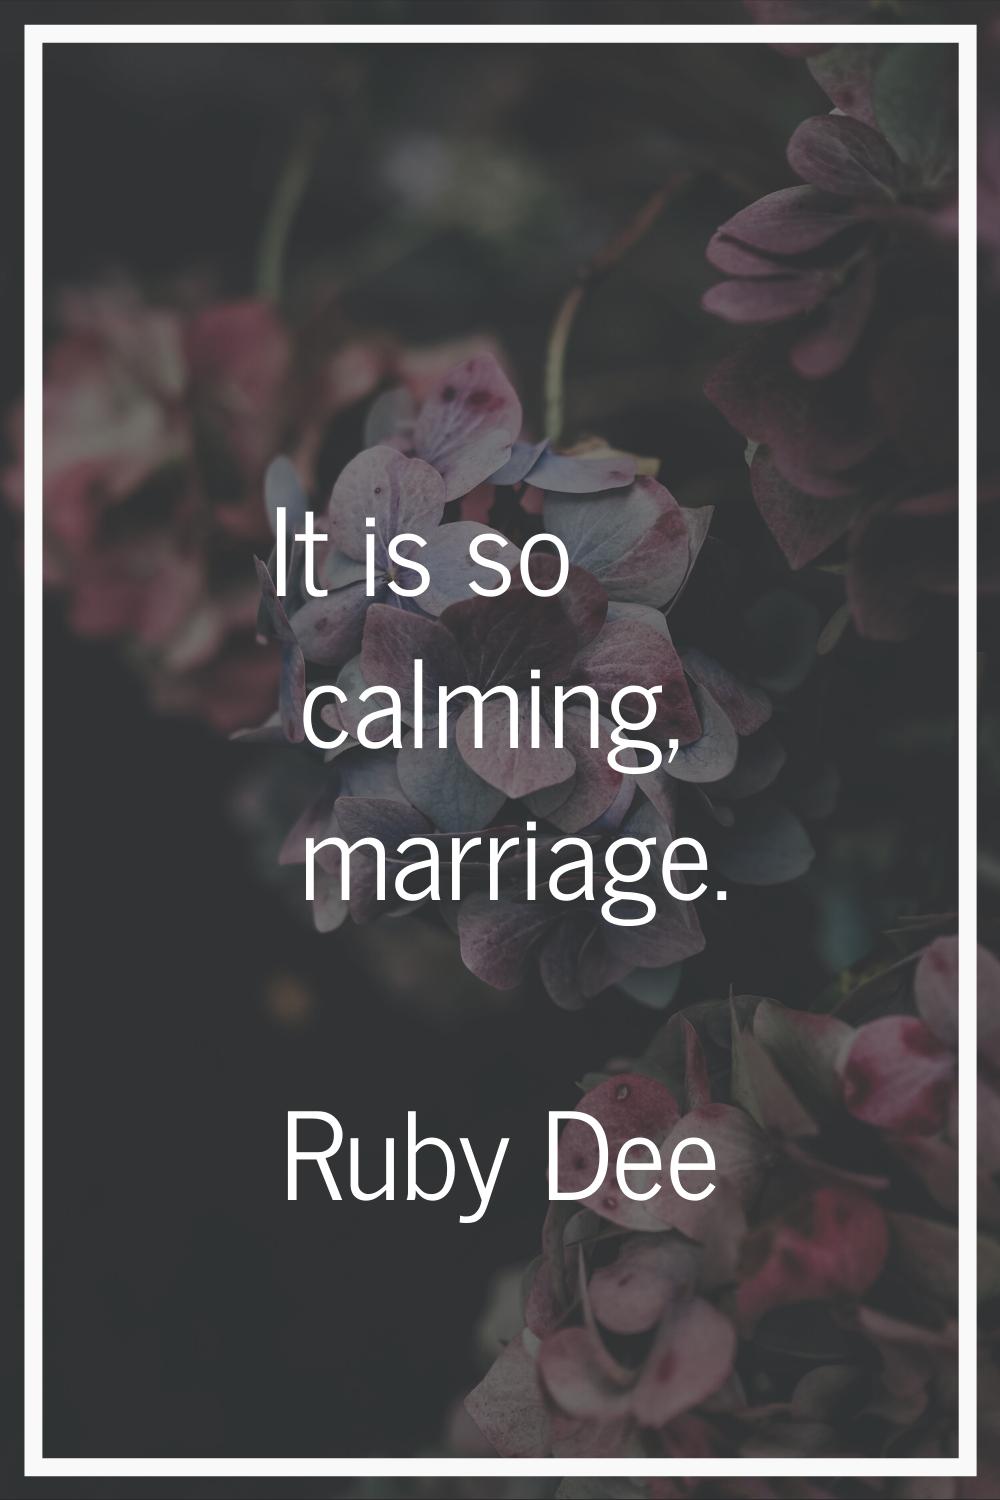 It is so calming, marriage.